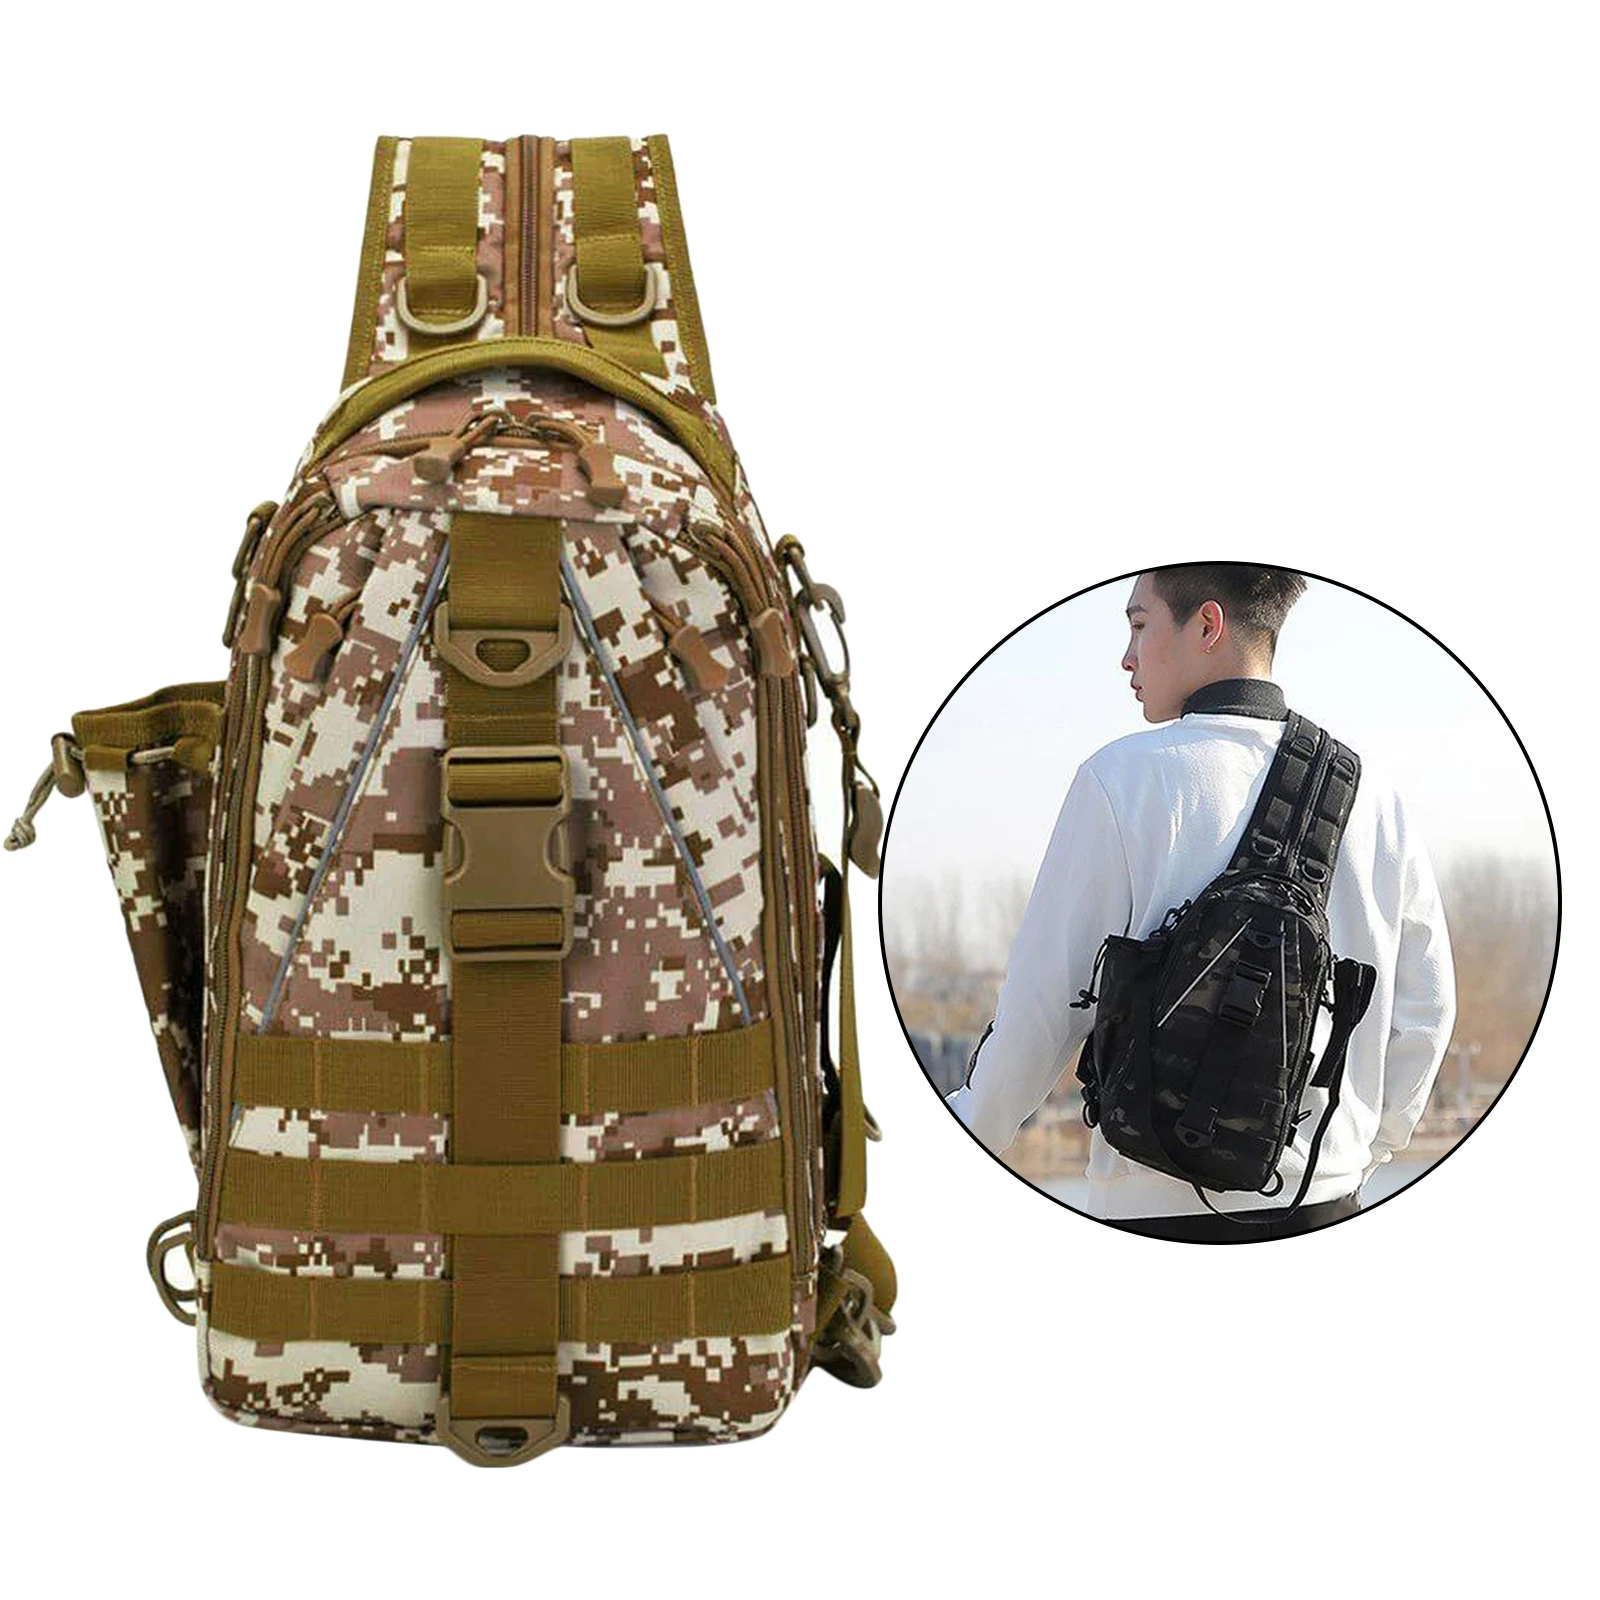 Men`s Sling Bag Chest Shoulder Backpack Crossbody Bag with 3 Compartment for Travel, Hiking ,Cycling Fishing Gear Storage Bag